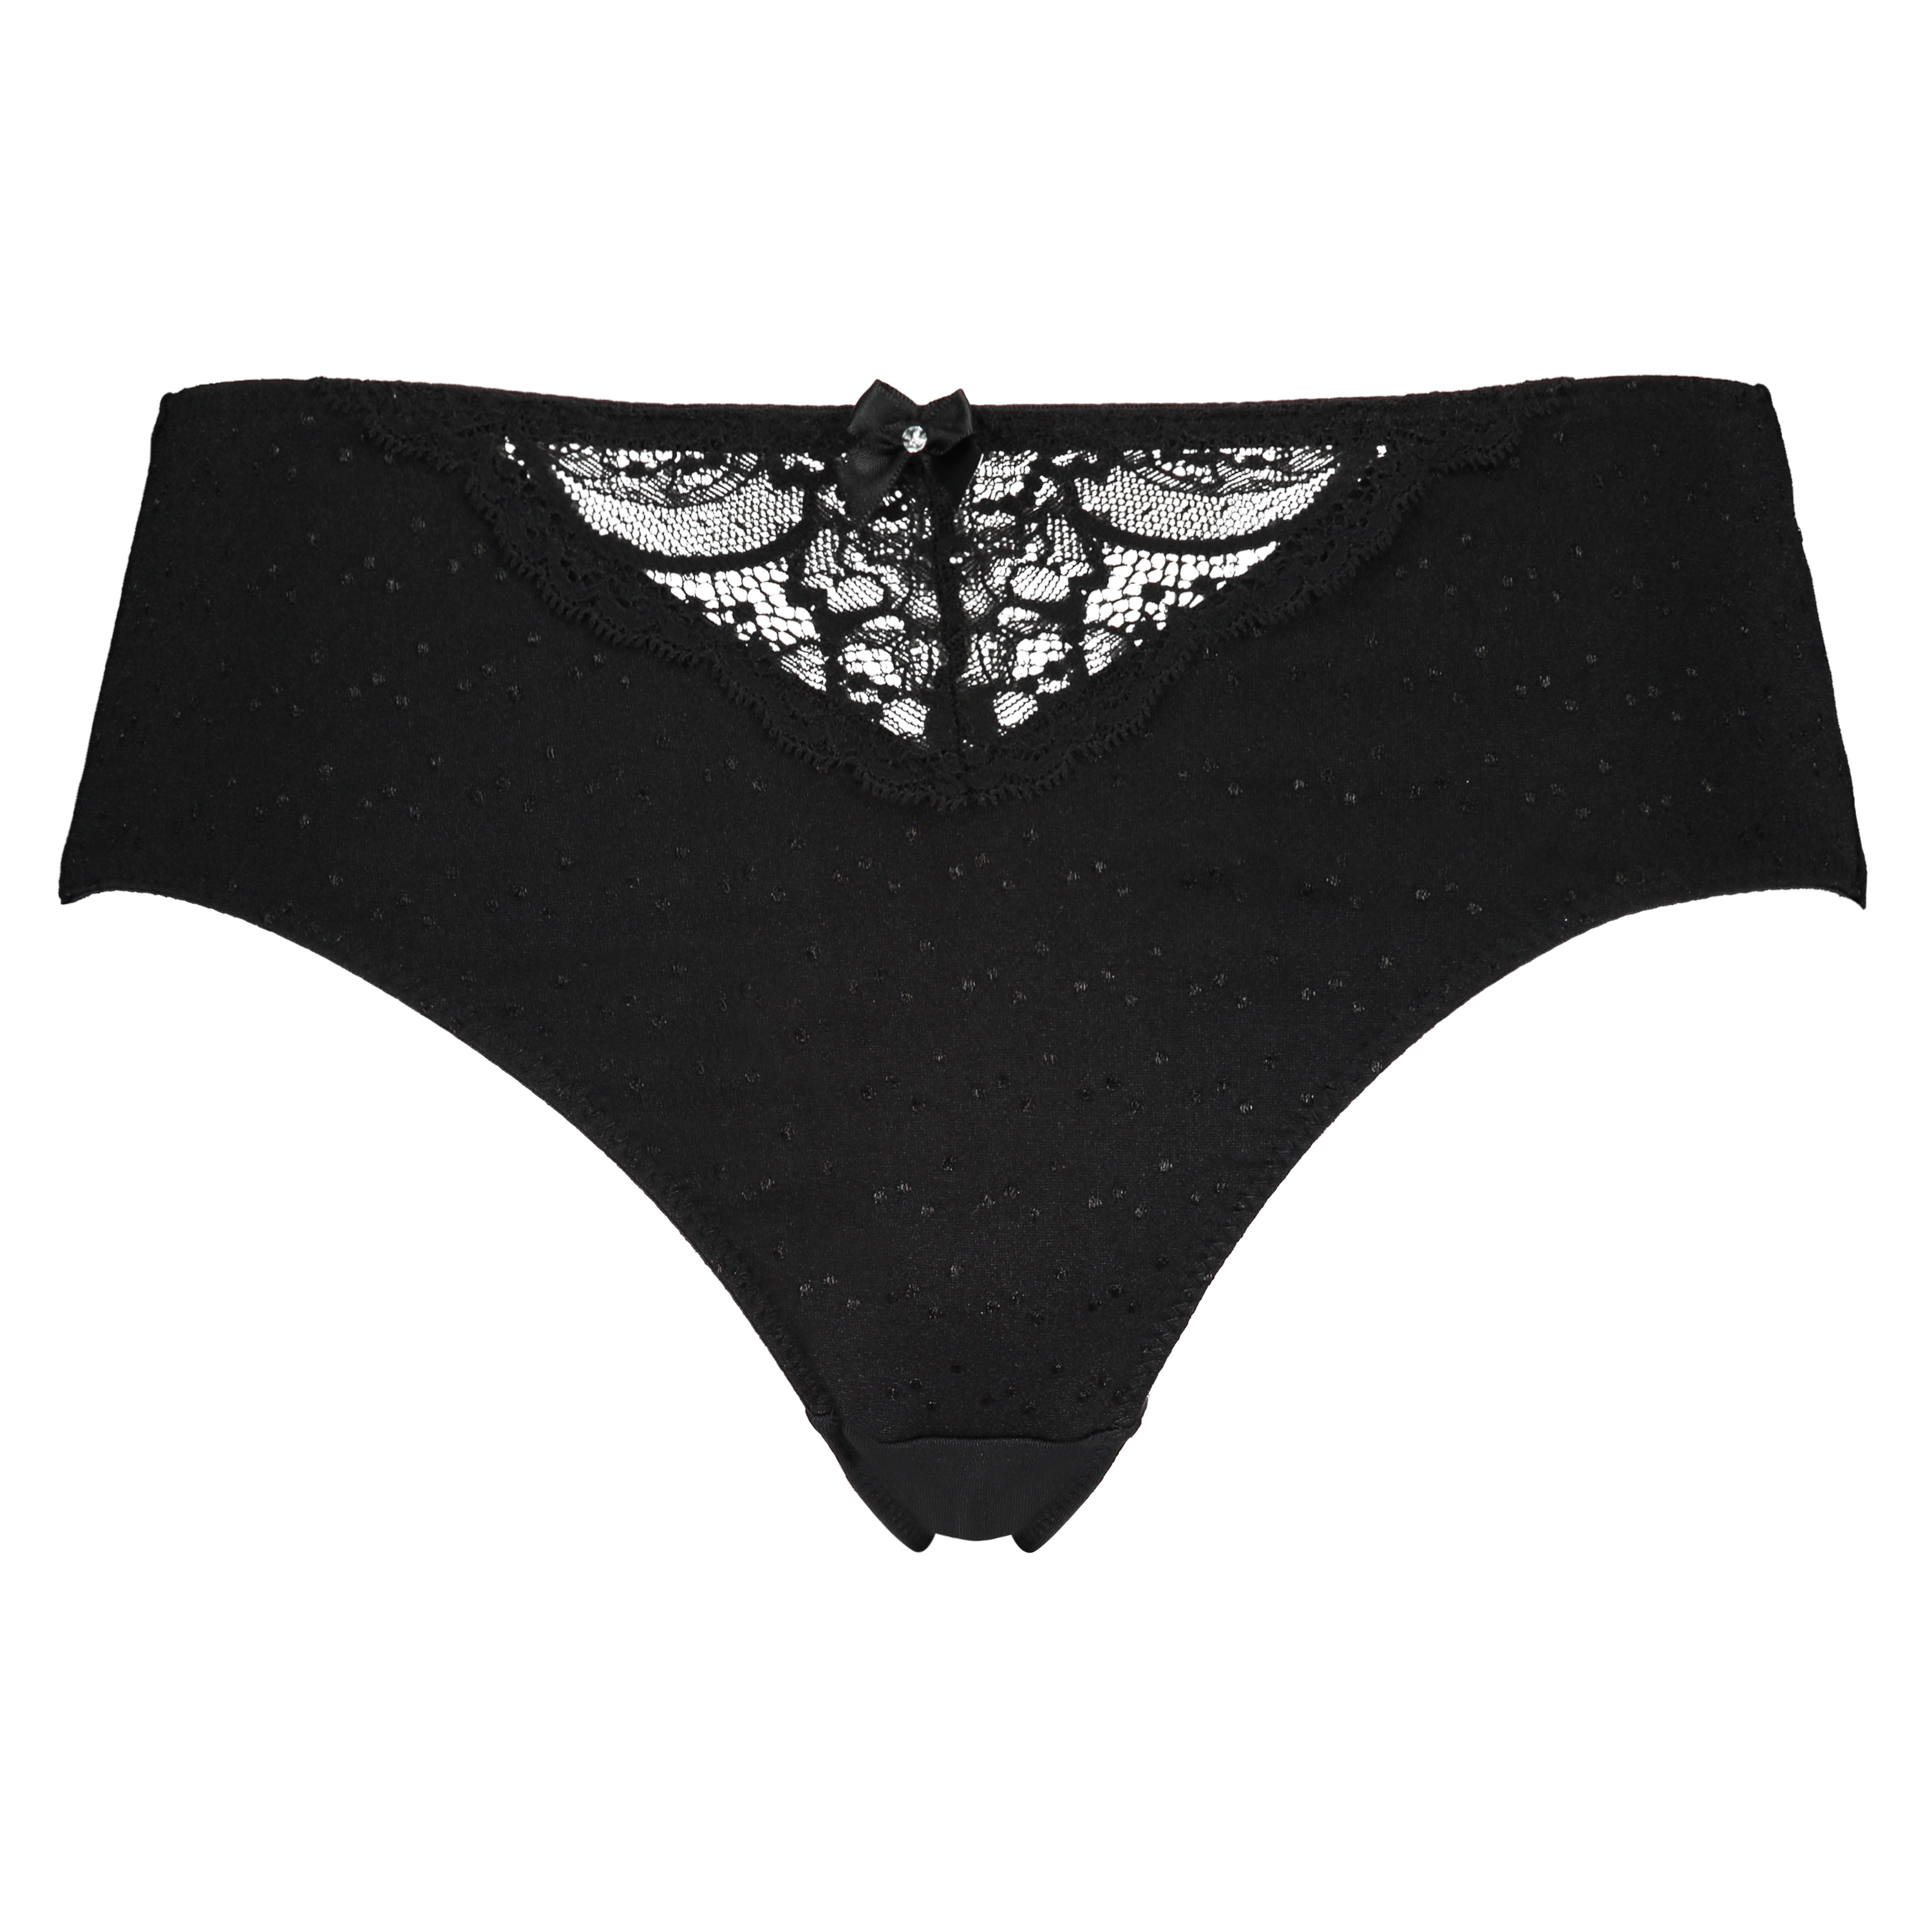 Sophie high knickers, Black, main